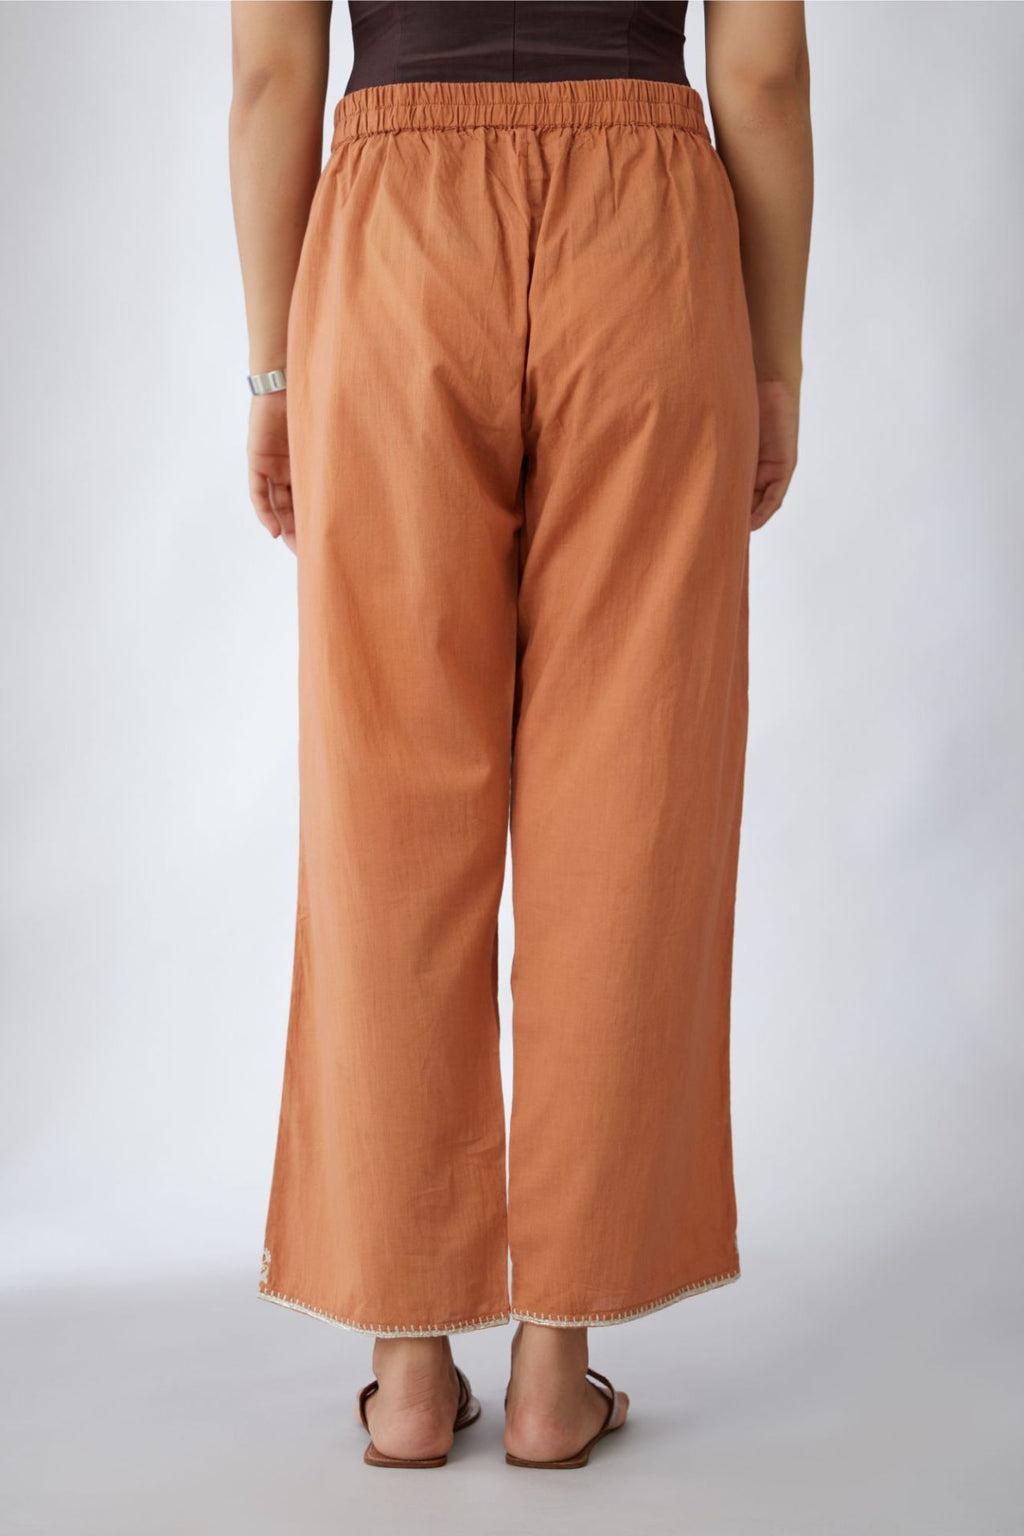 Copper cotton straight pants with silver embroidery detailing at bottom hem (Pants)